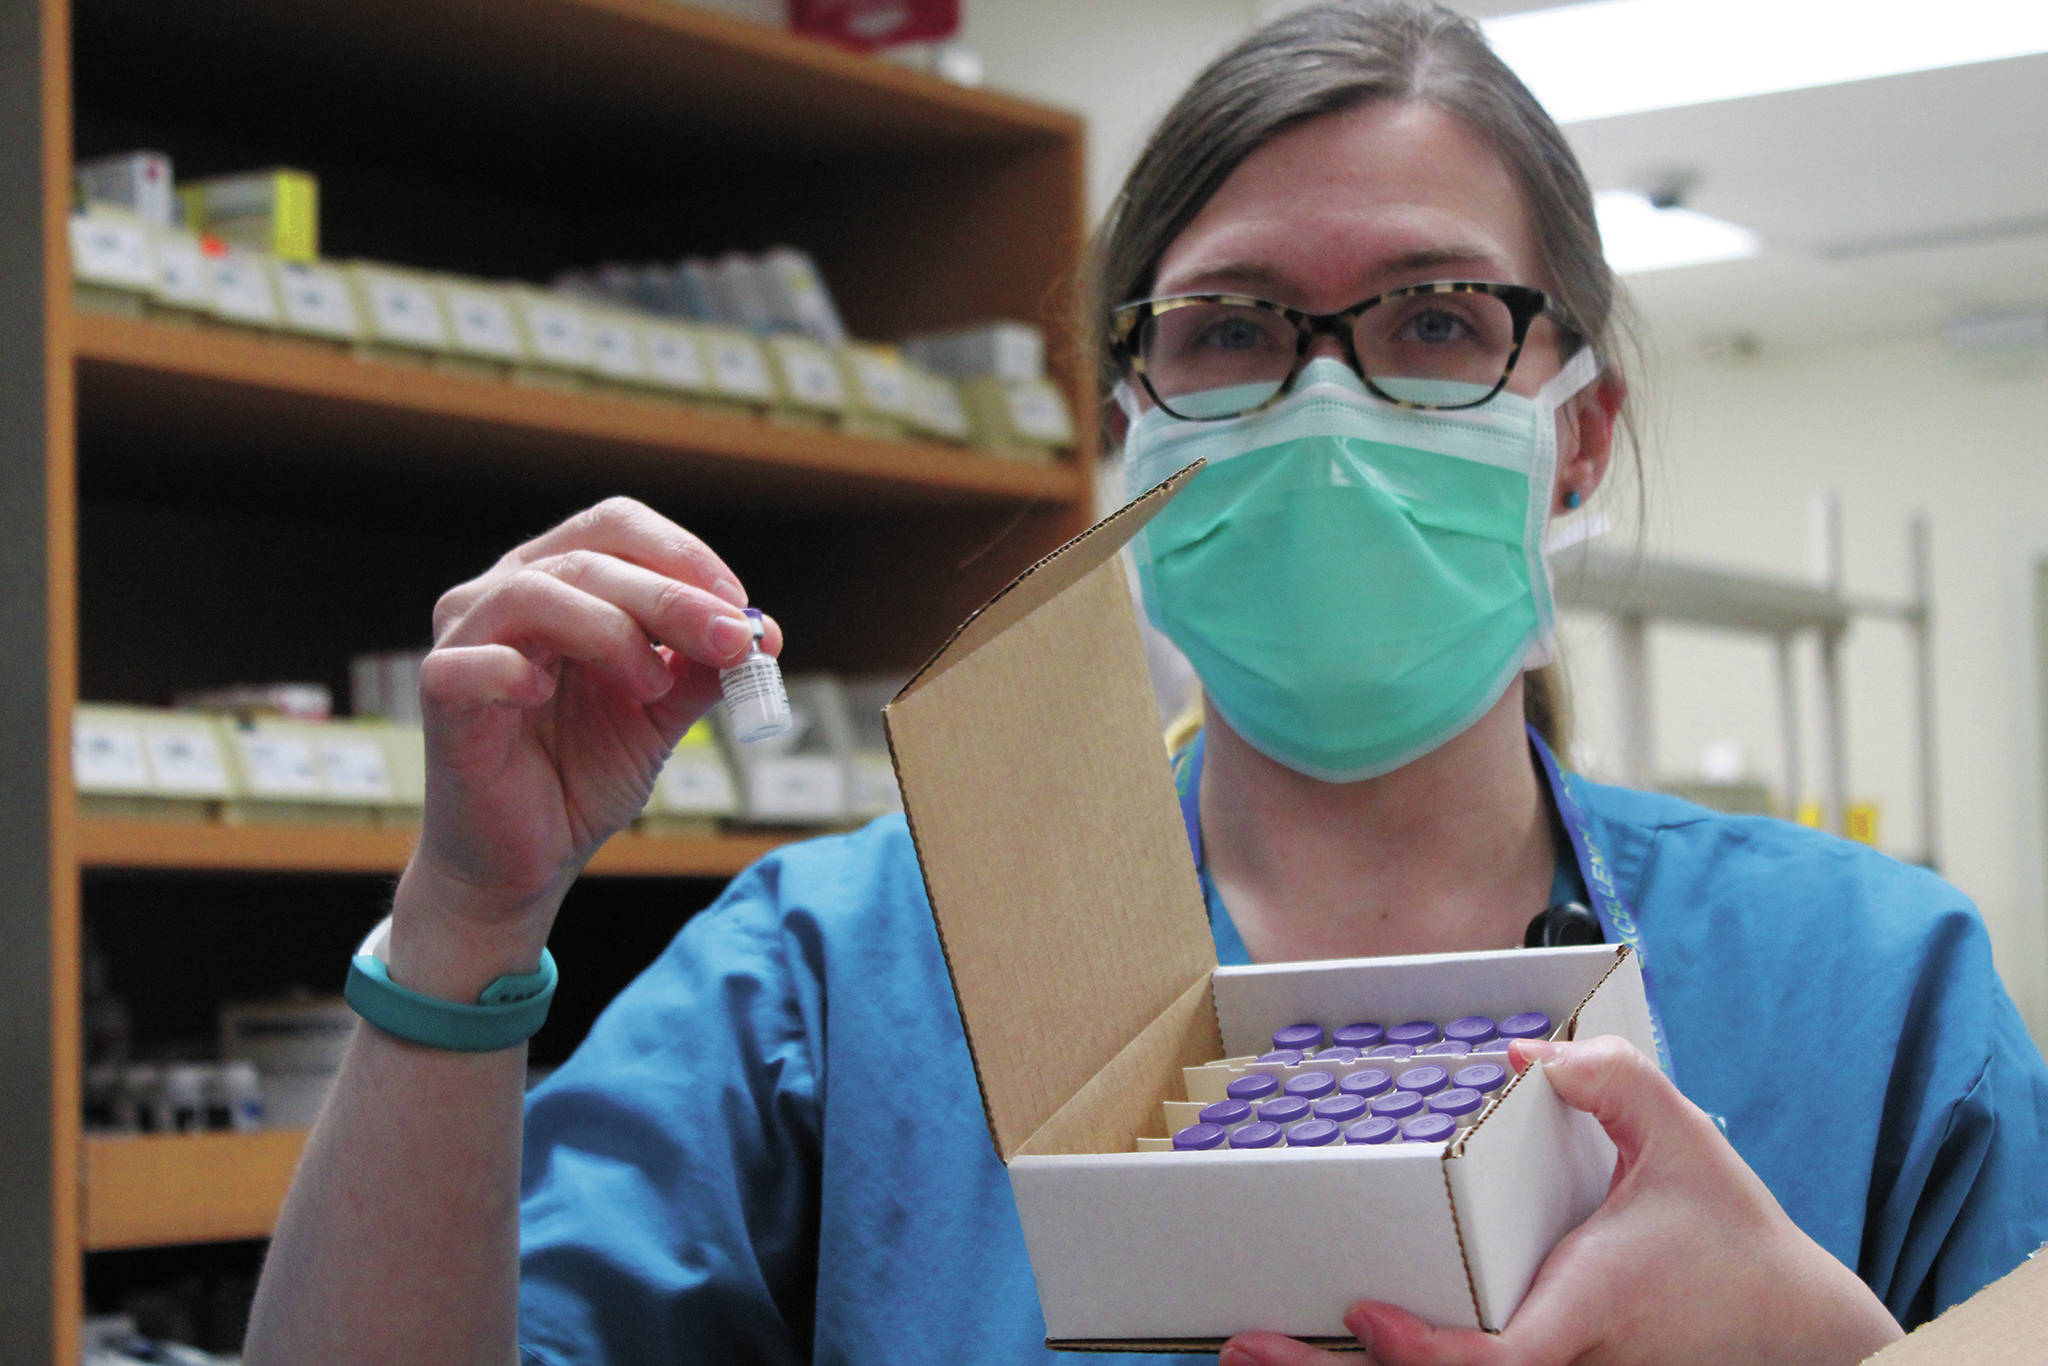 South Peninsula Pharmacist Jill Kort holds up a vial of the Pfizer vaccine for COVID-19 shortly after it arrived at the hospital on Wednesday, Dec. 16, 2020 in Homer, Alaska. (Photo by Megan Pacer/Homer News)